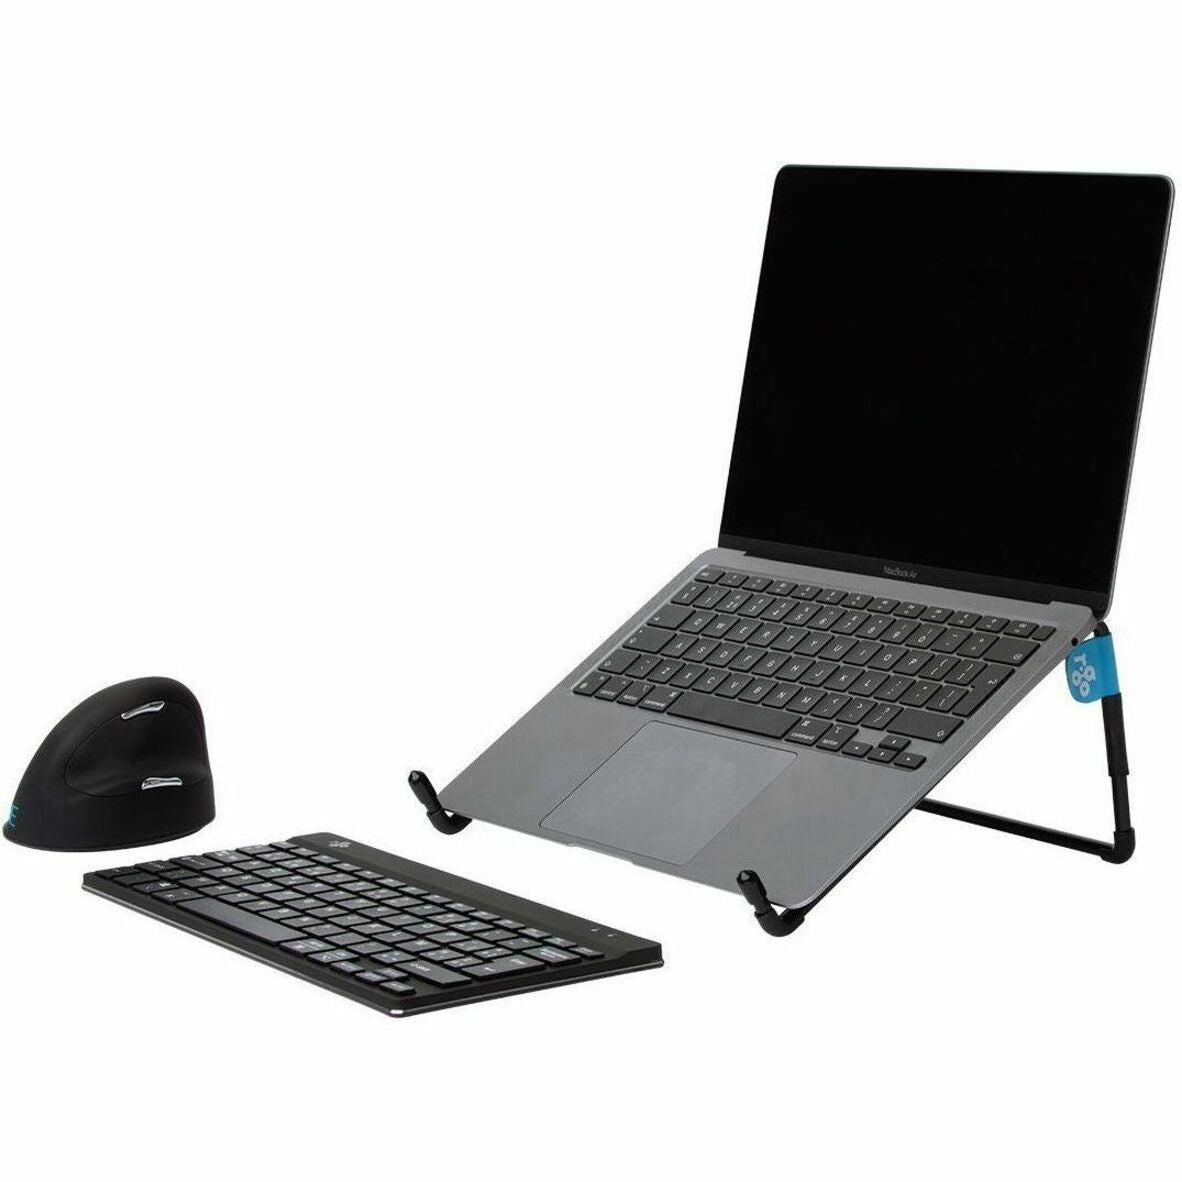 R-Go RGOSC015BL Steel Travel Laptop Stand, Foldable Notebook Stand, 11.02 lb Maximum Load Capacity